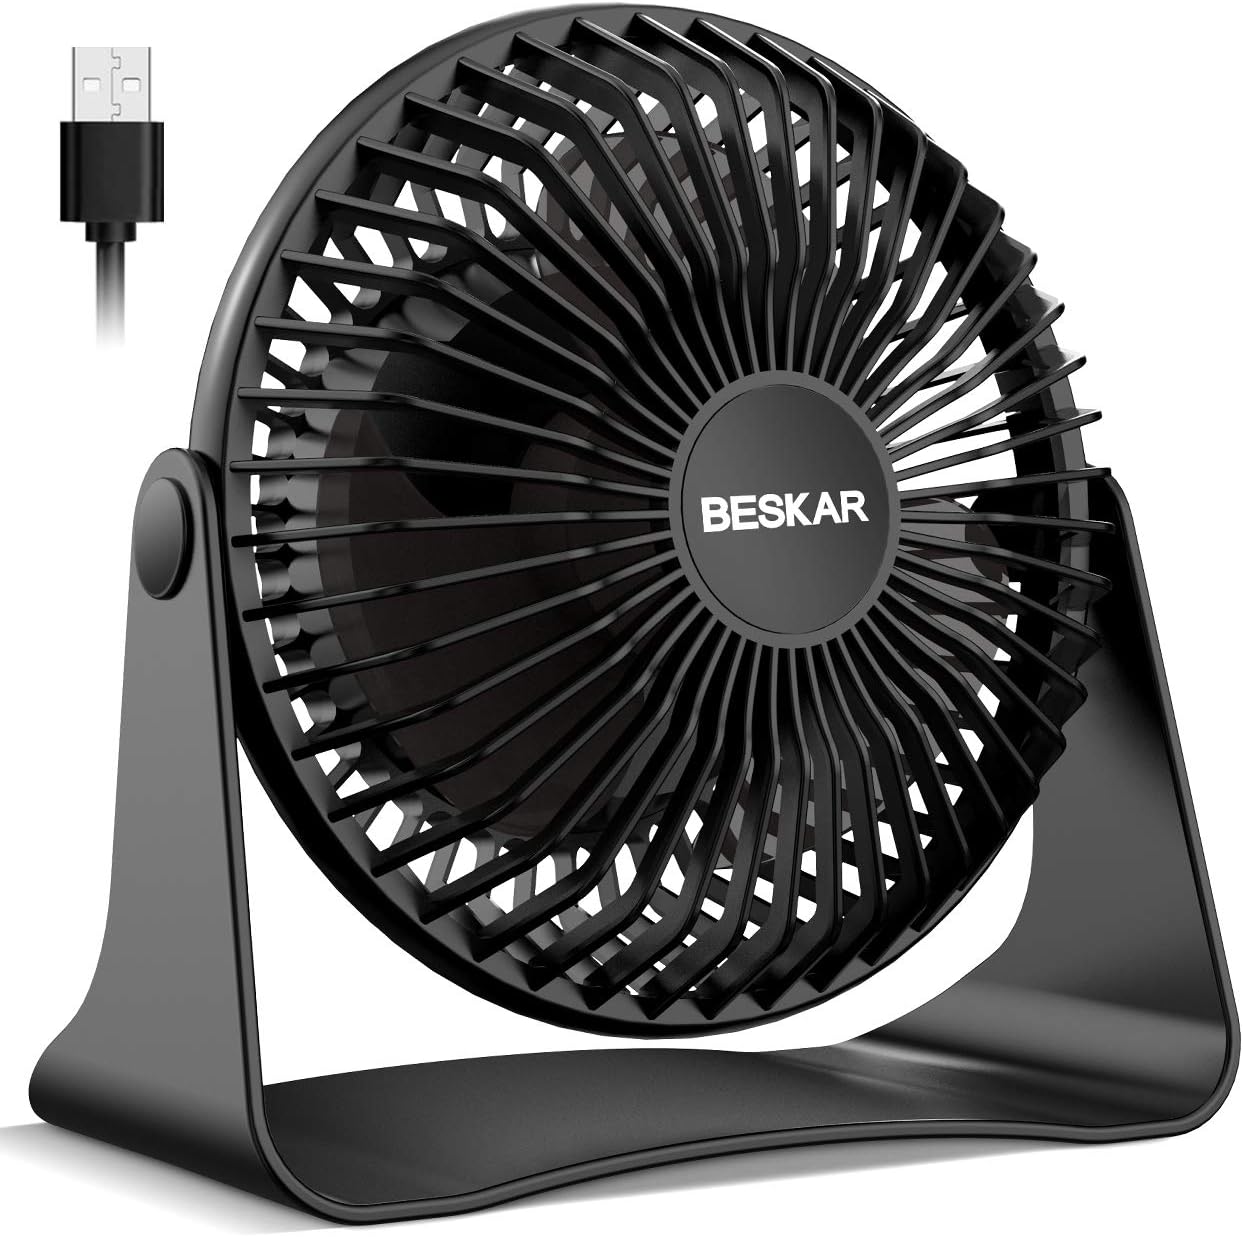 BESKAR USB Small Desk Fan, Portable Fans with 3 Speeds Strong Airflow, Quiet Operation and 360Rotate, Personal Table Fan for Home,Office, Bedroom - 3.9 ft Cord